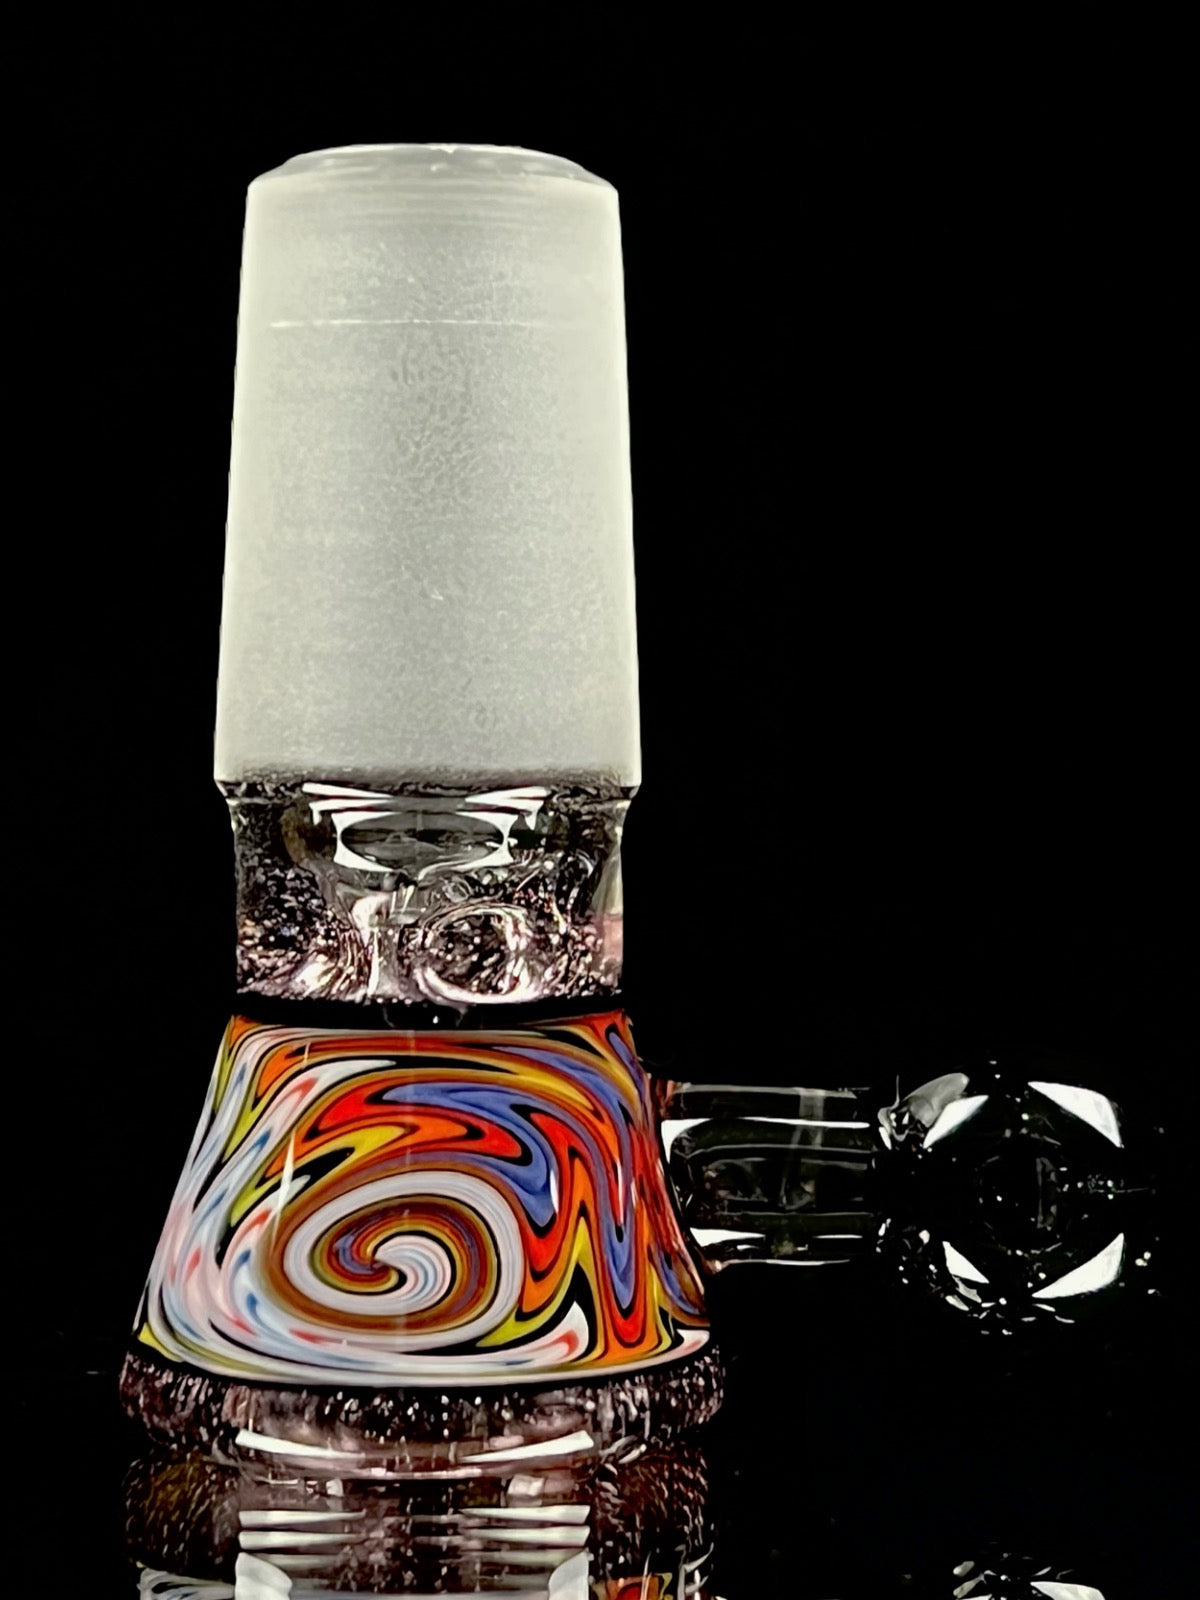 18mm cool pink slide by Mercurius Glass